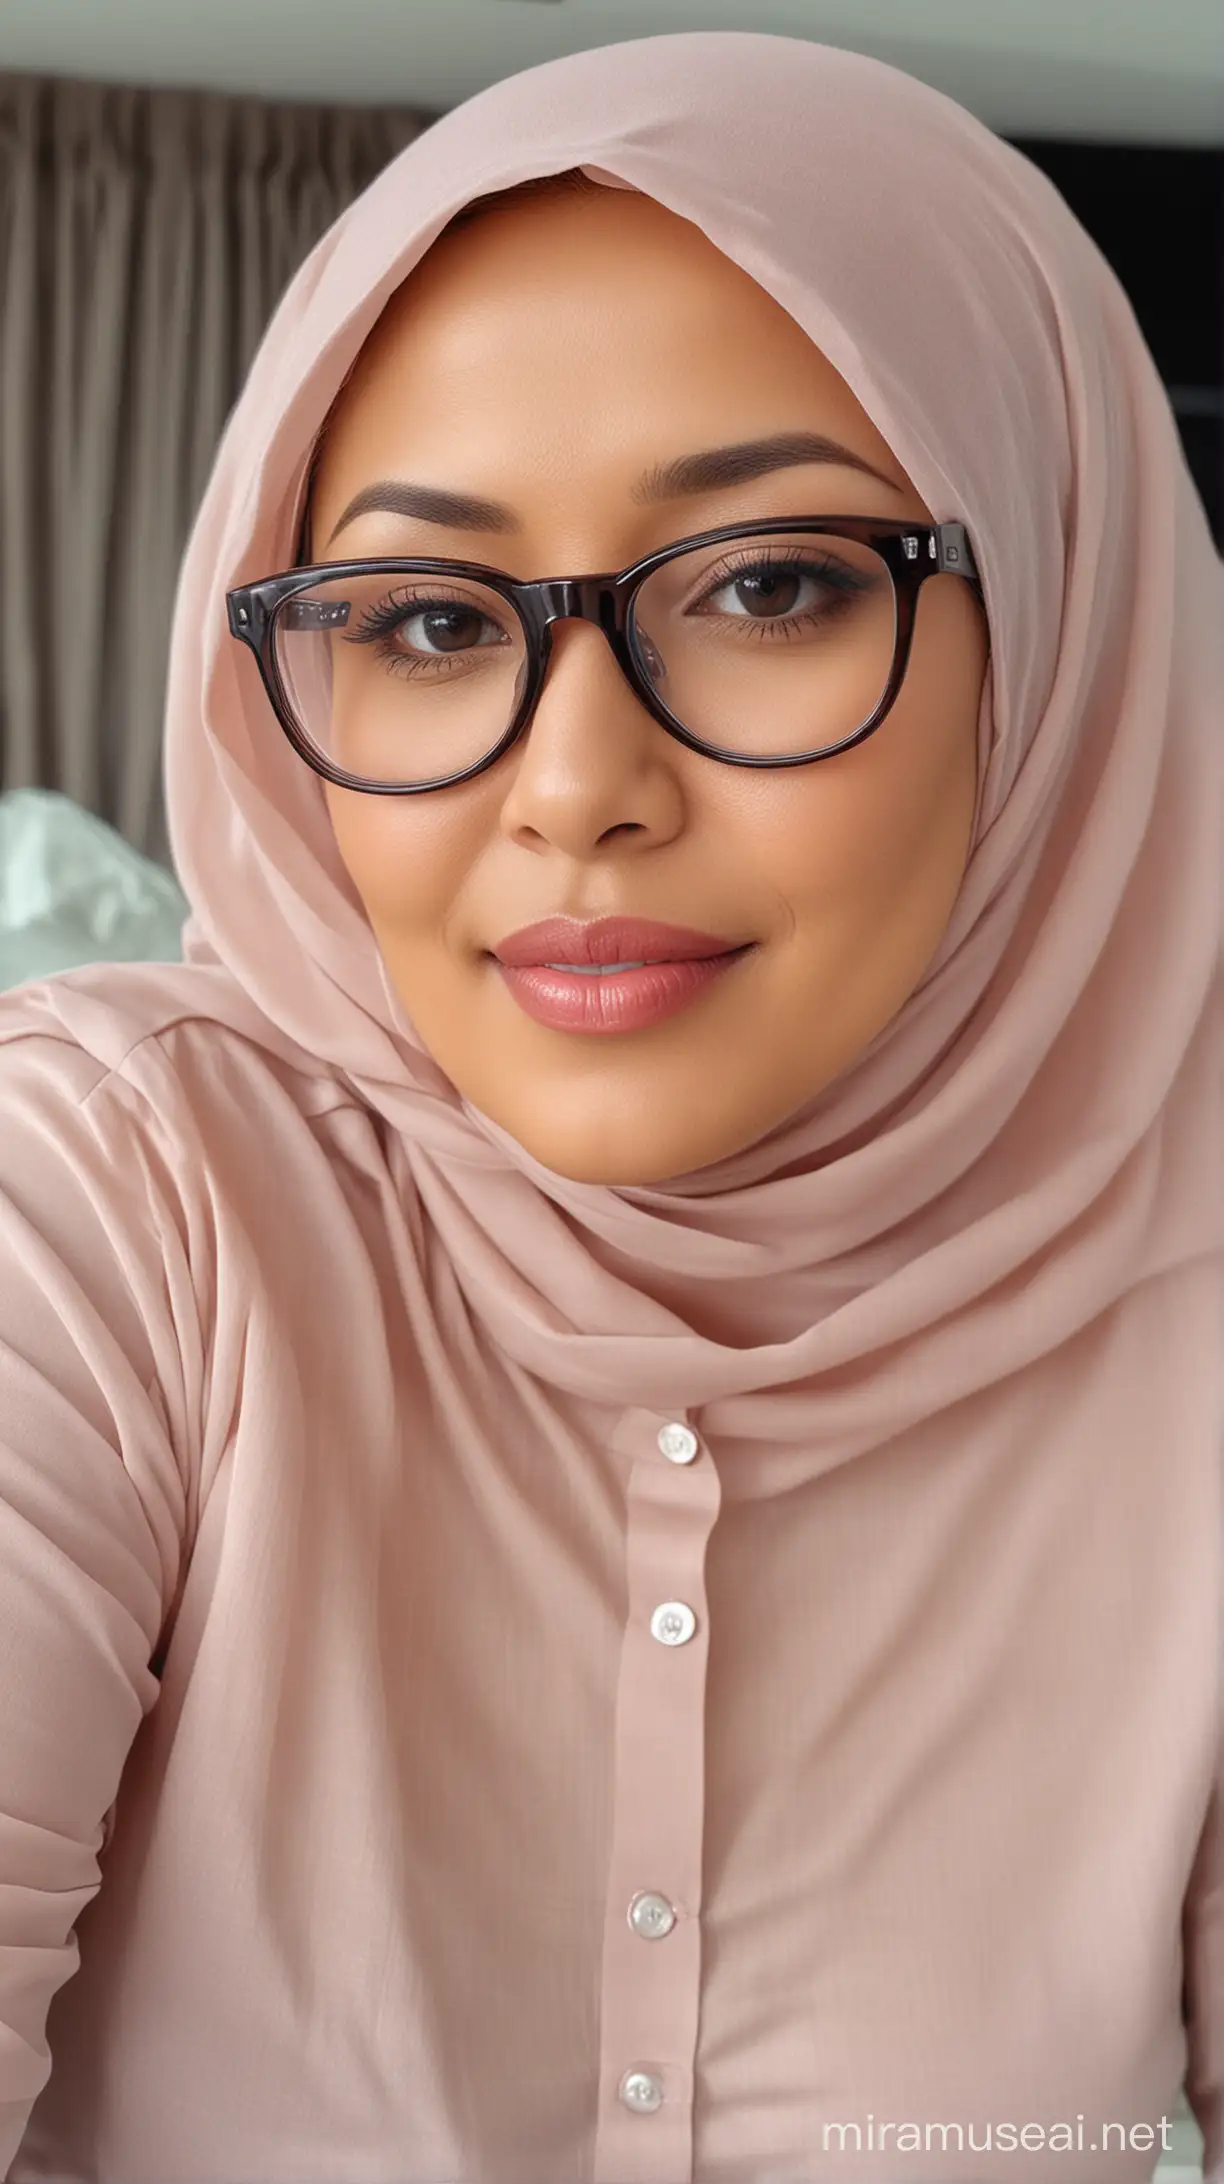 Sensual Indonesian Woman in Transparent Shirt with Glasses